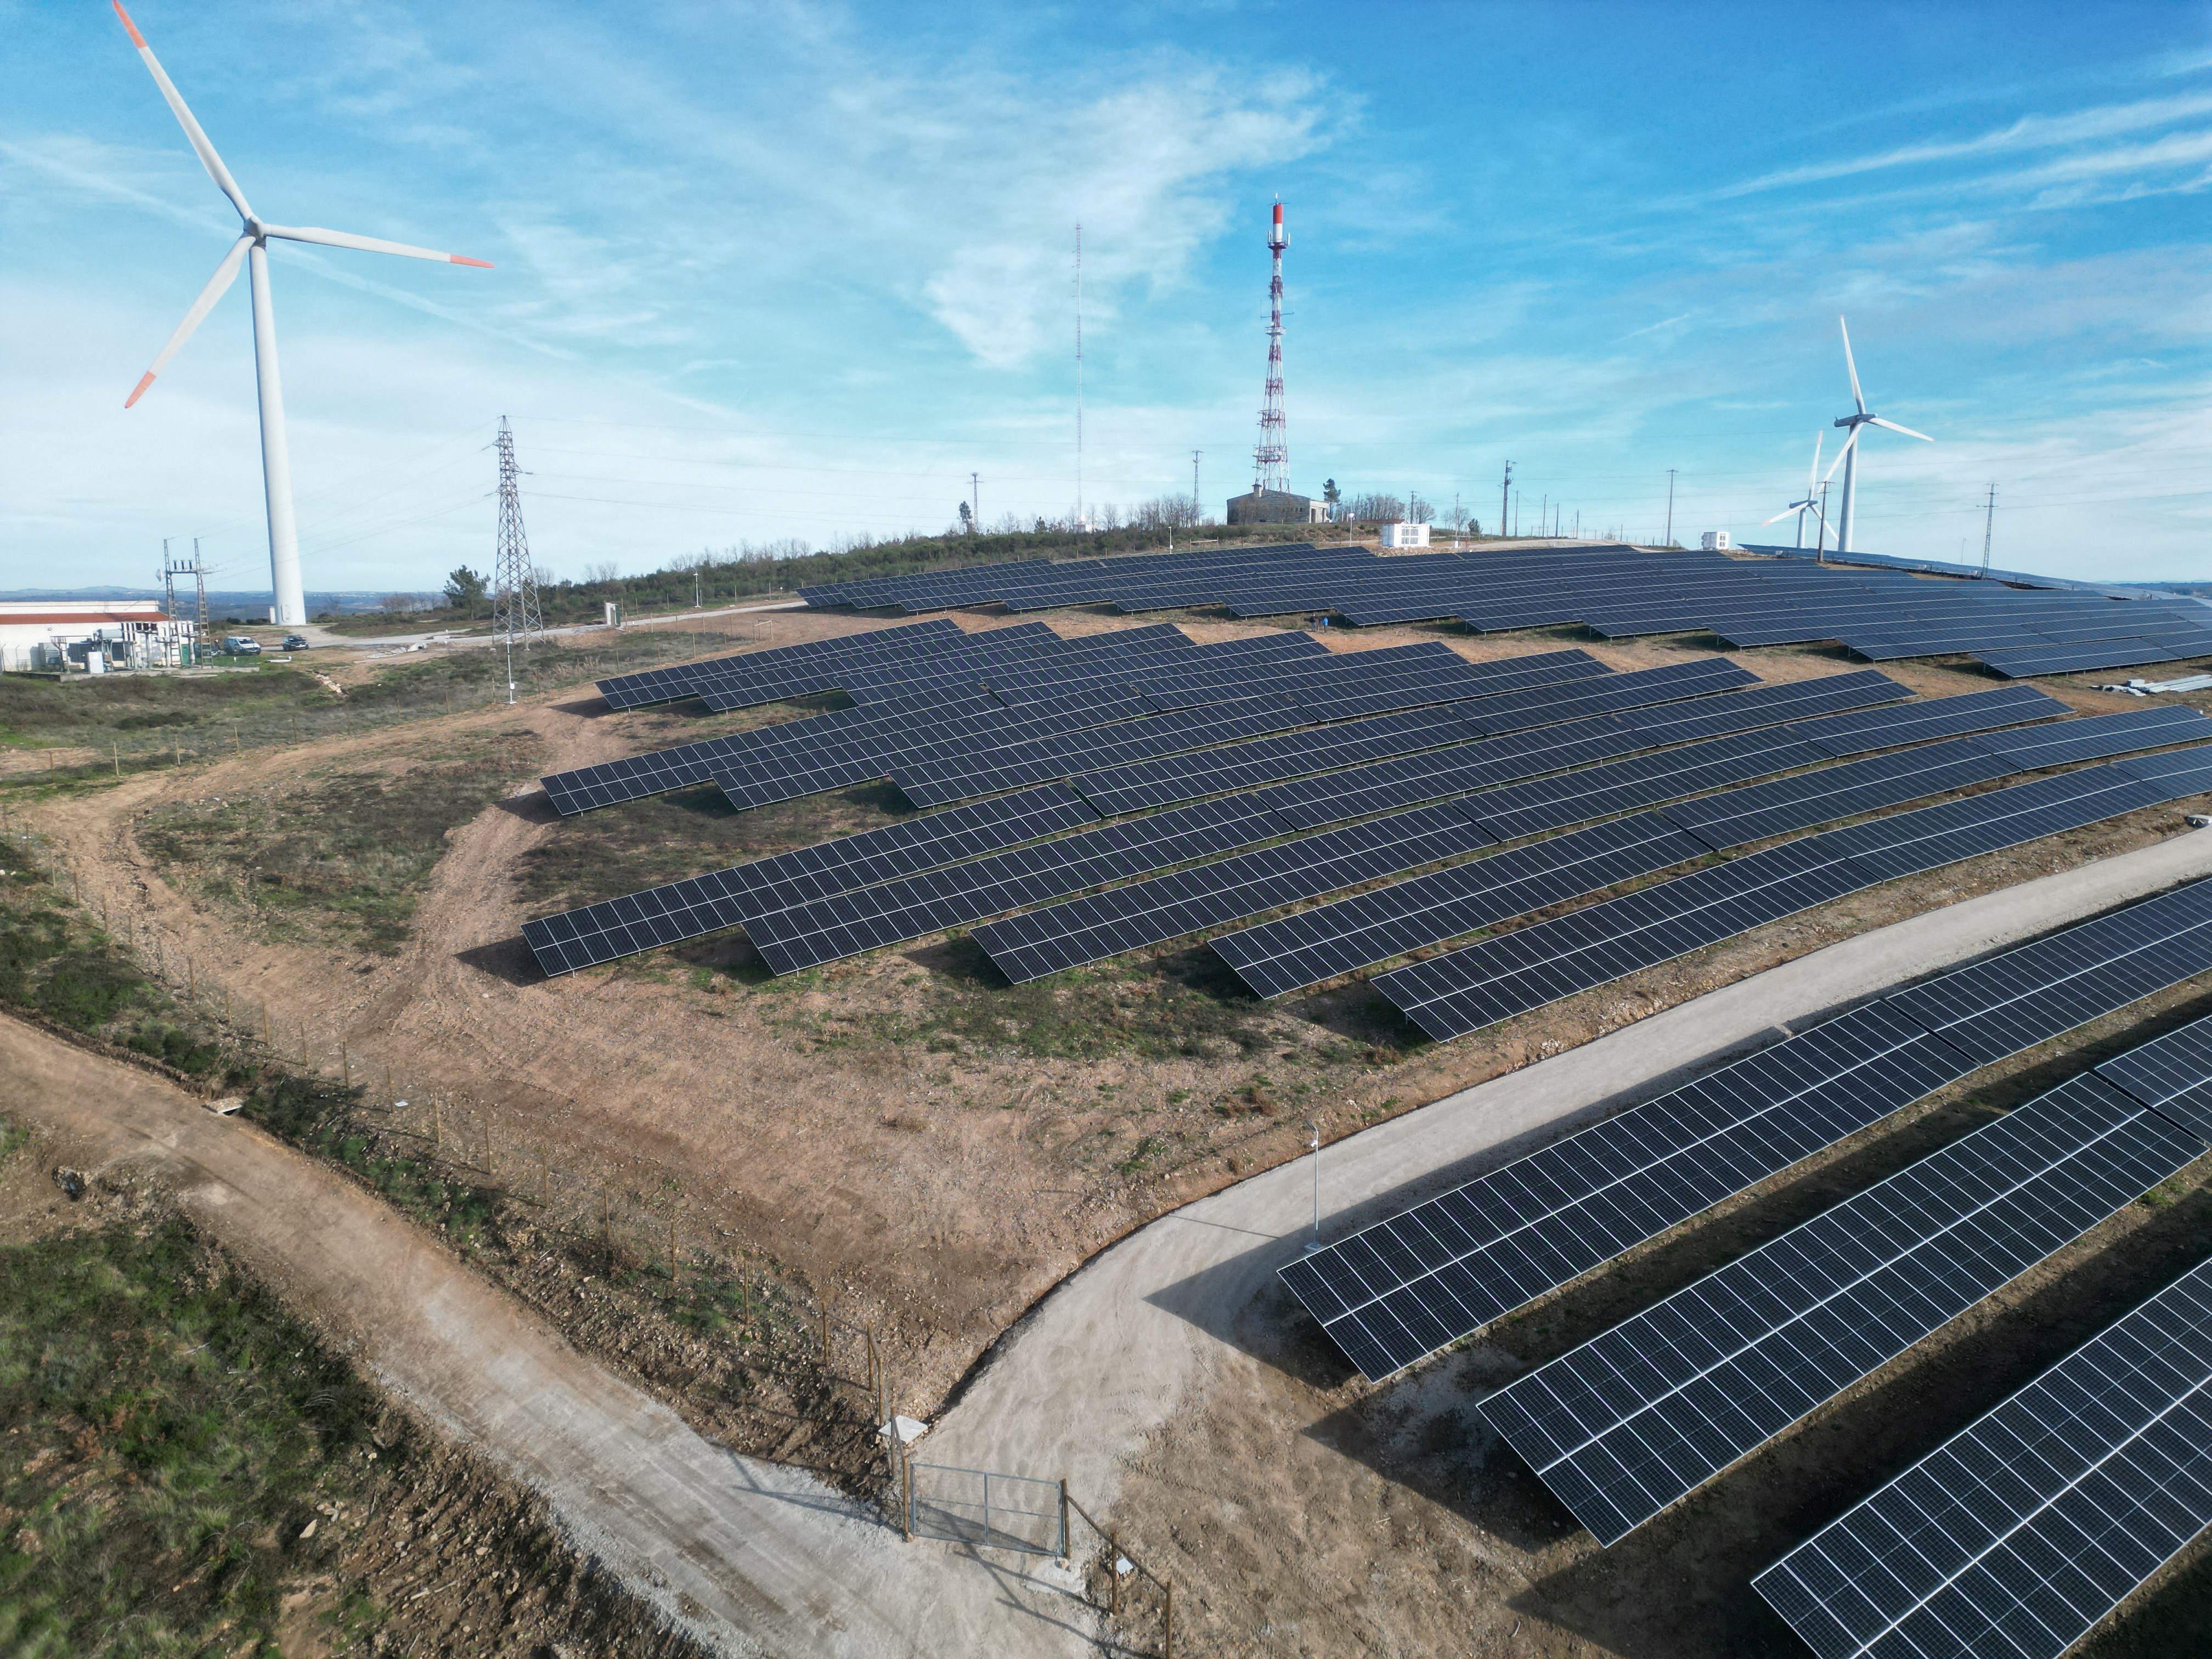 Drone view of a hybrid power park with solar panels and wind turbines in Sabuga, Portugall